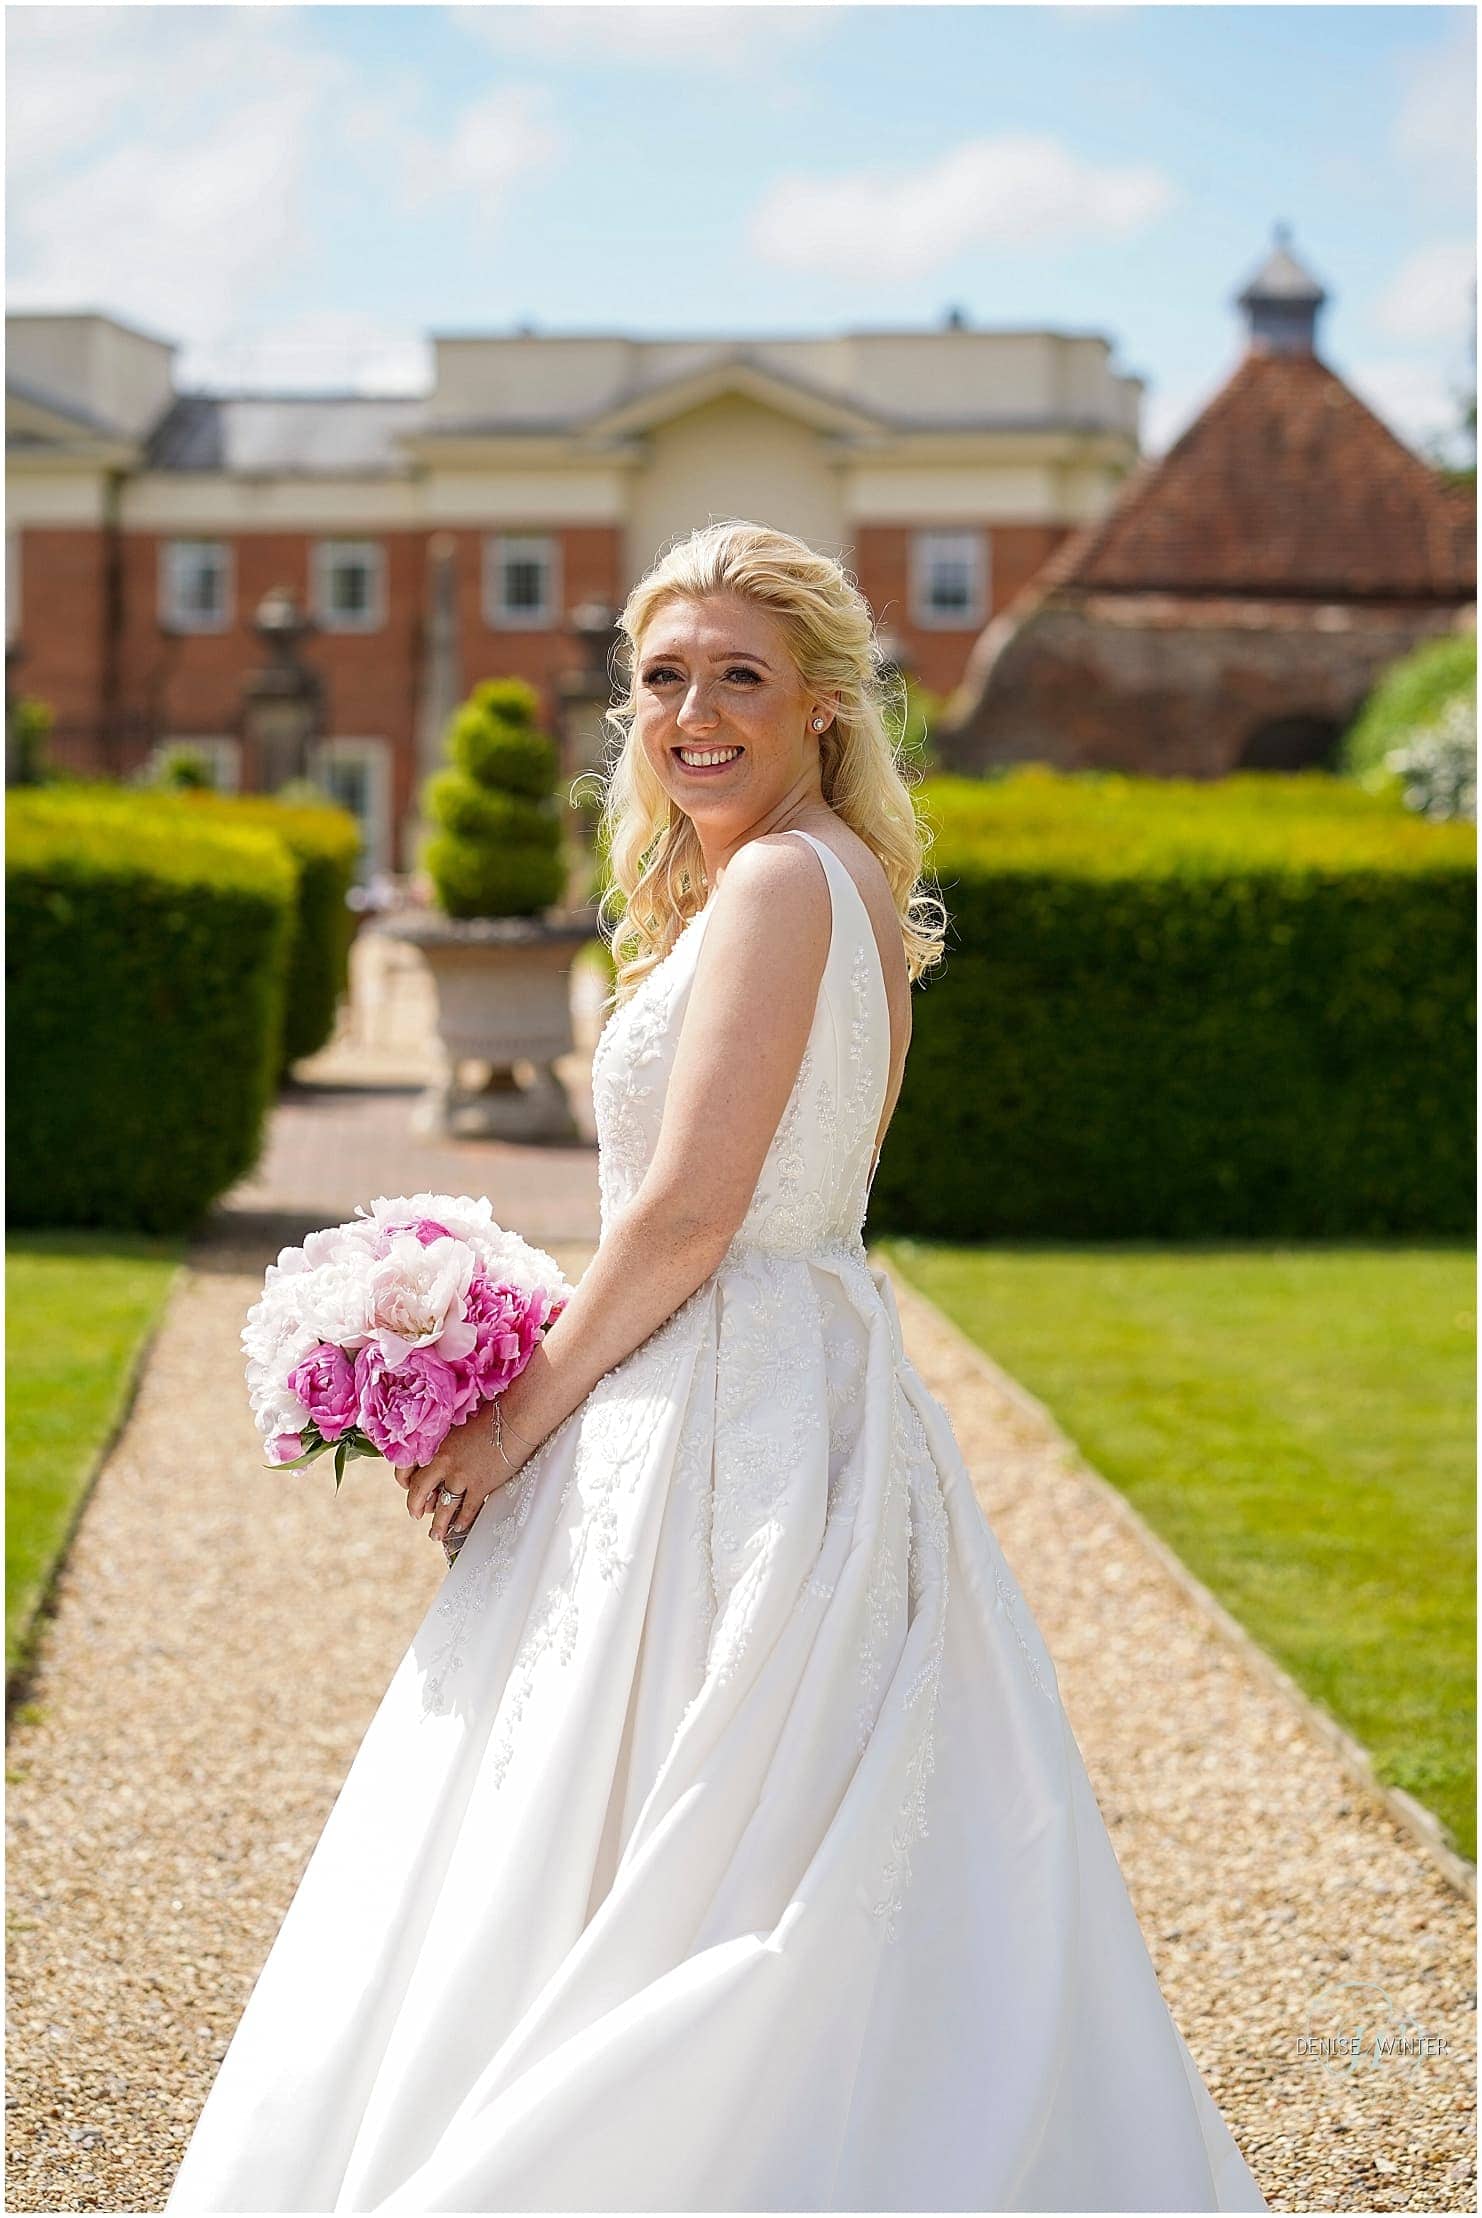 Bride on her wedding day at the Four Seasons Hotel in Hampshire